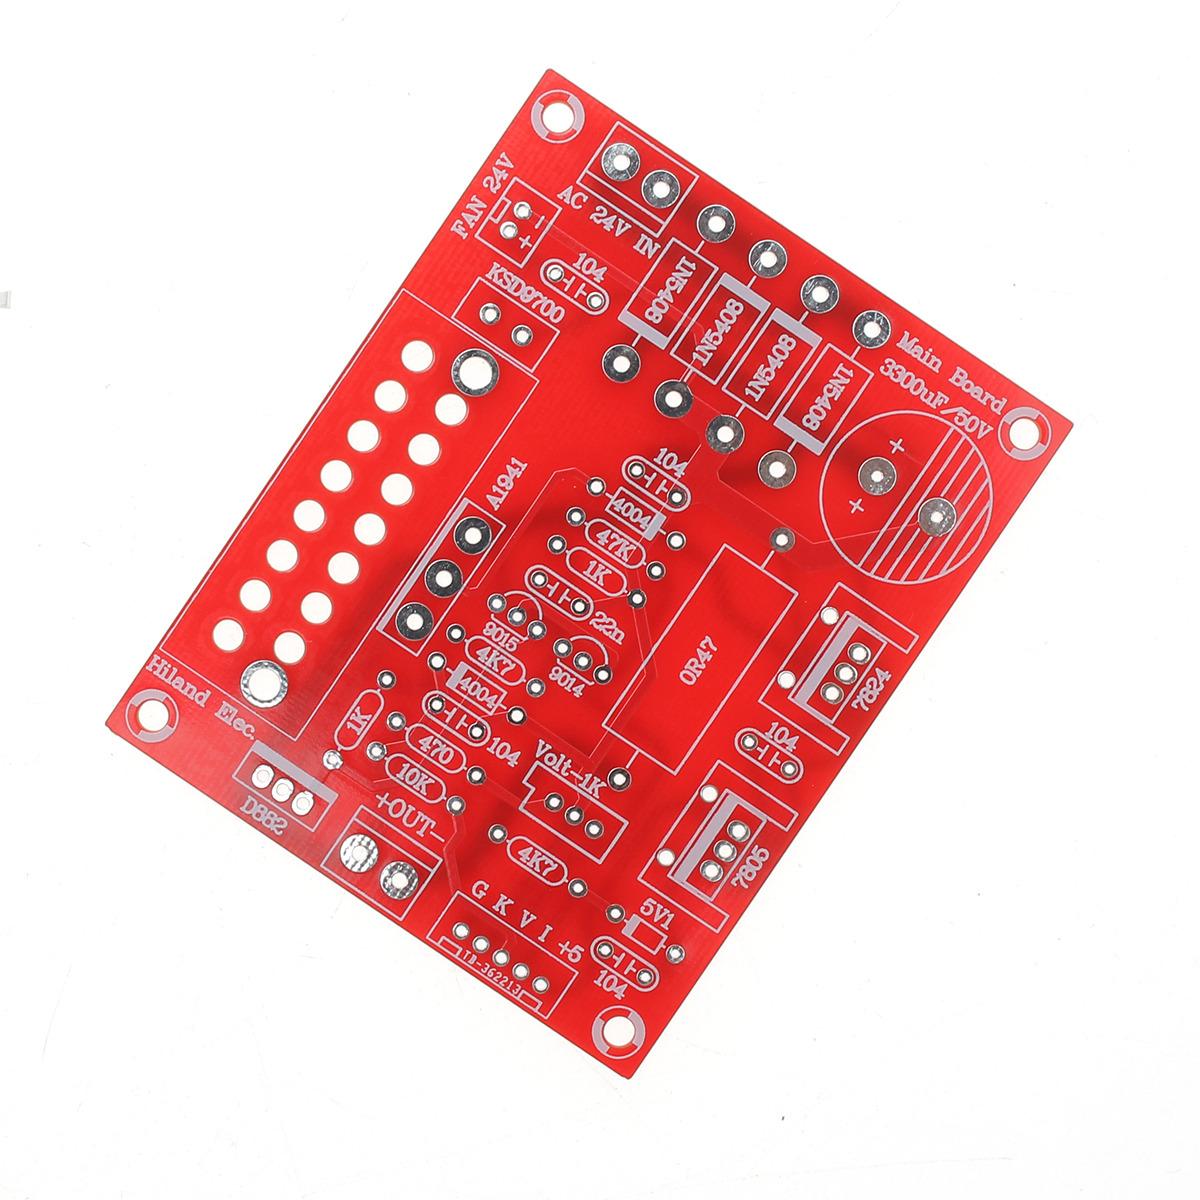 0-28V 0.01-2A Adjustable DC Regulated Power Supply Module DIY Kit Short Circuit Current Limiting Protection 44